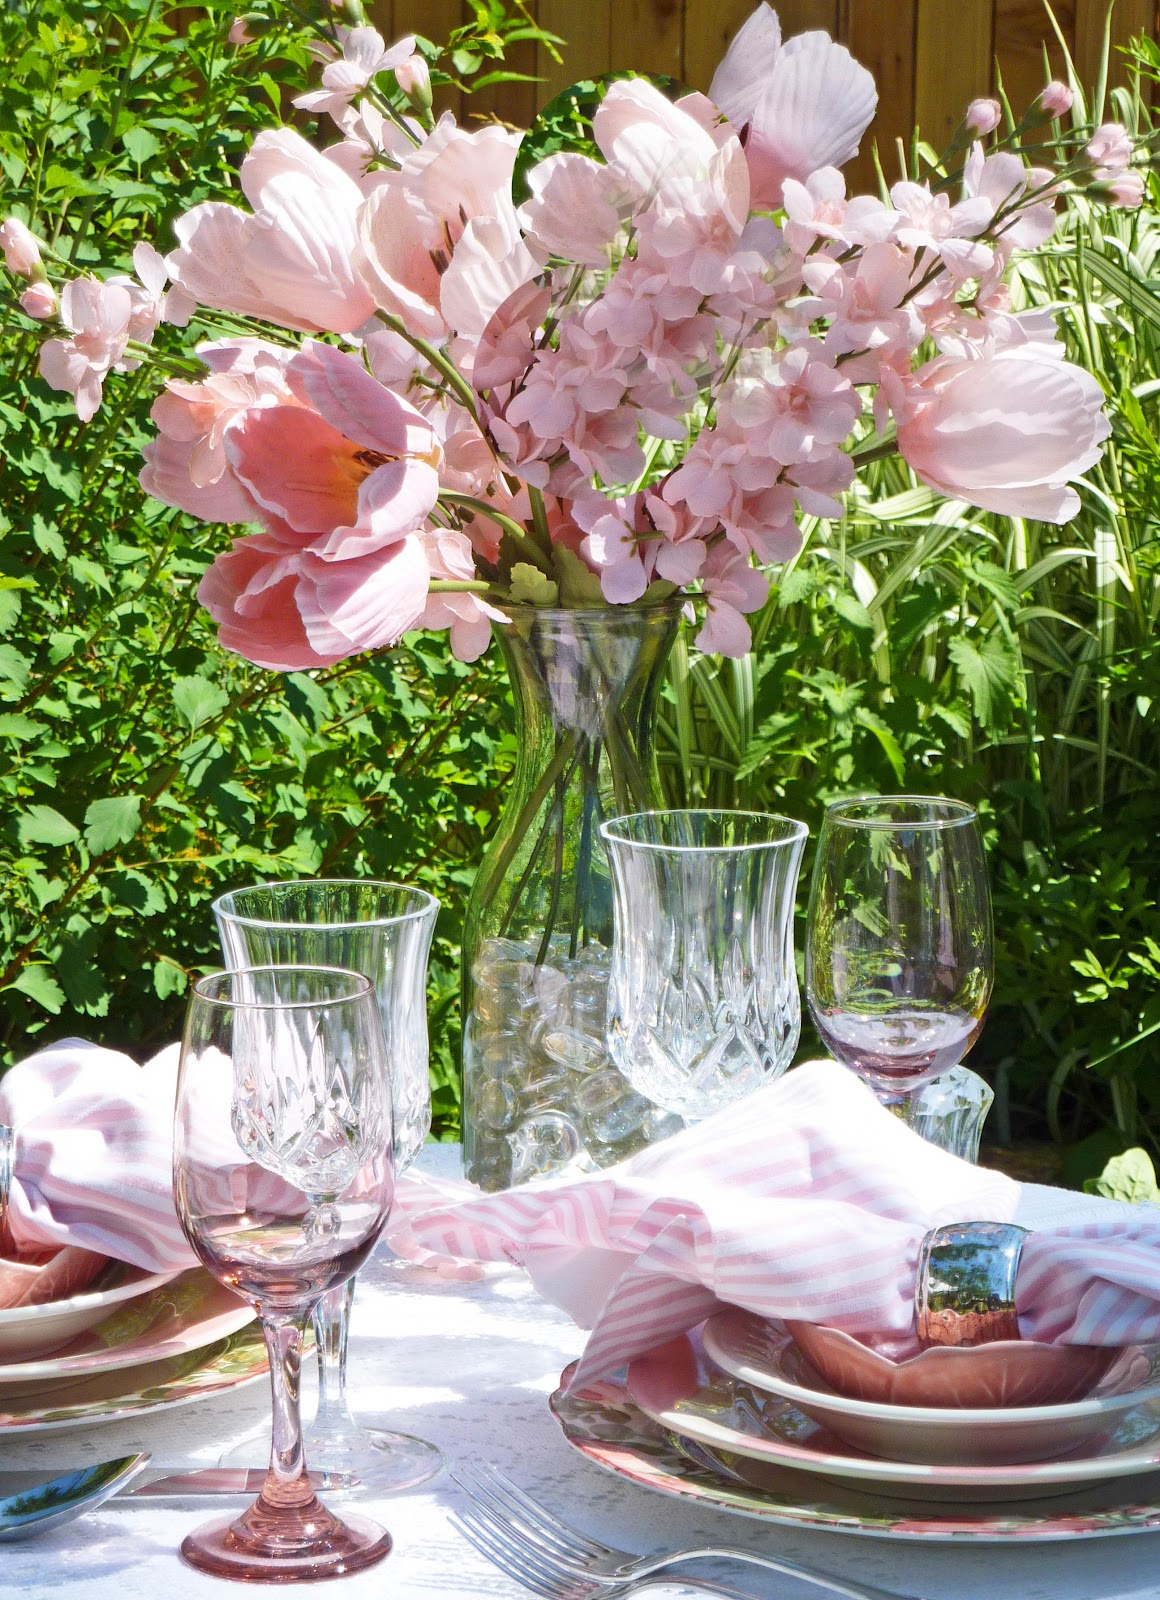 Creating Wonderful Spaces: Painting the Garden Pink!